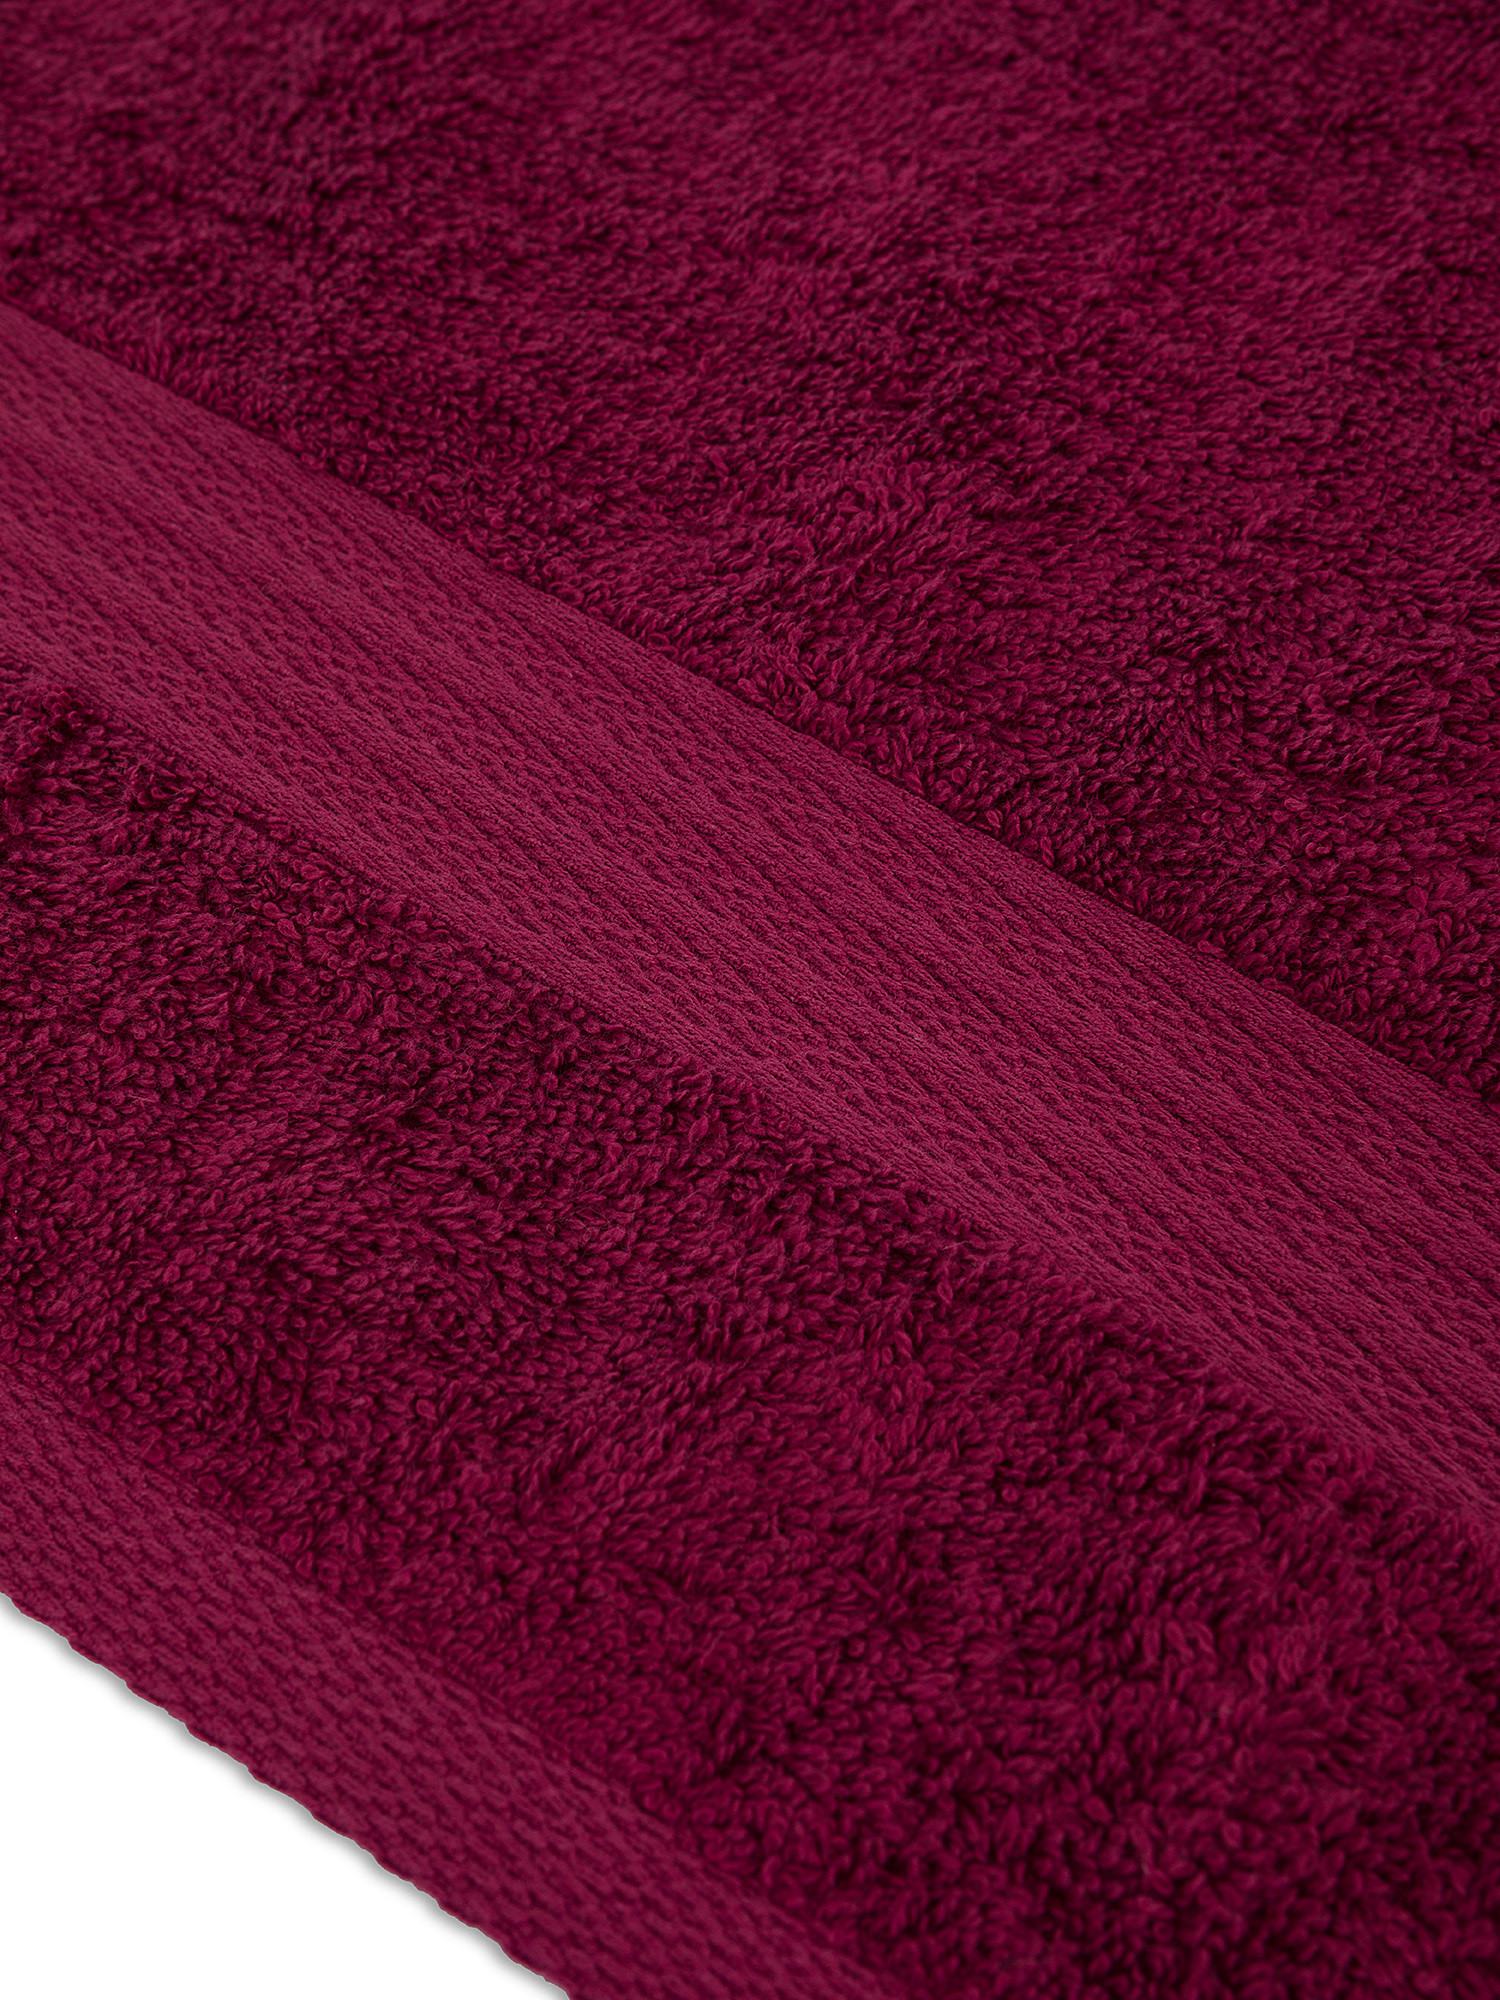 Zefiro solid color 100% cotton towel, Cherry Red, large image number 2